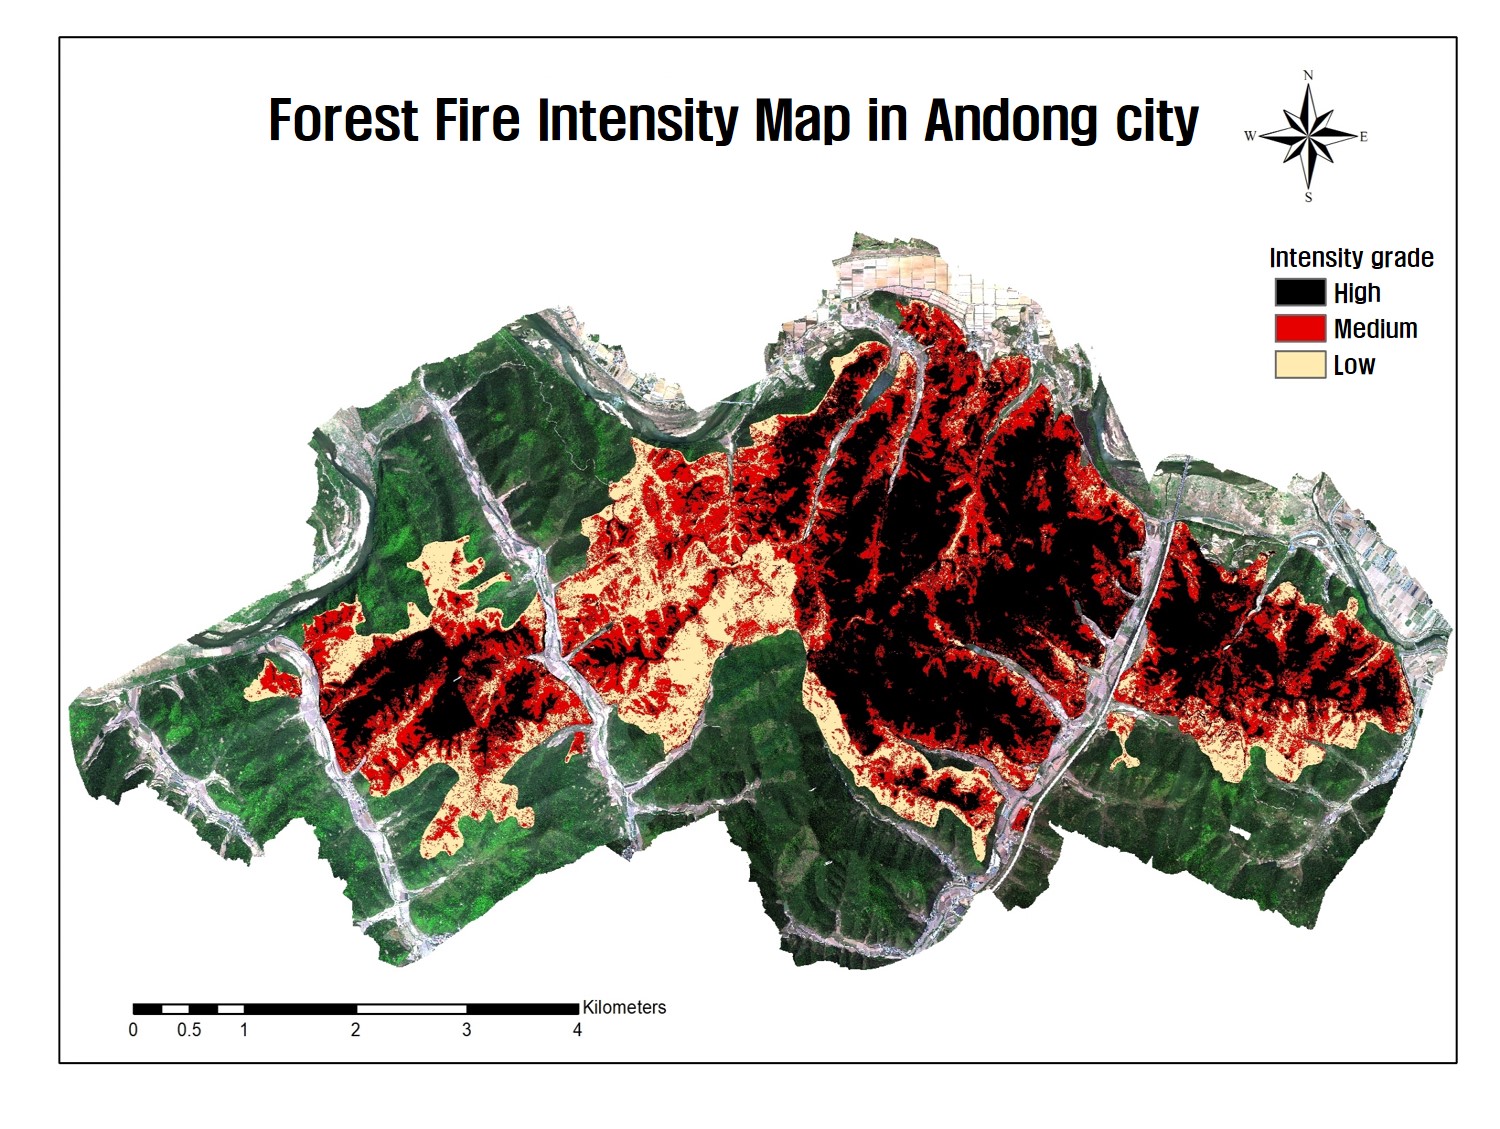 Spectrum Texture Analysis Using UAV Image in forestfire damaged area